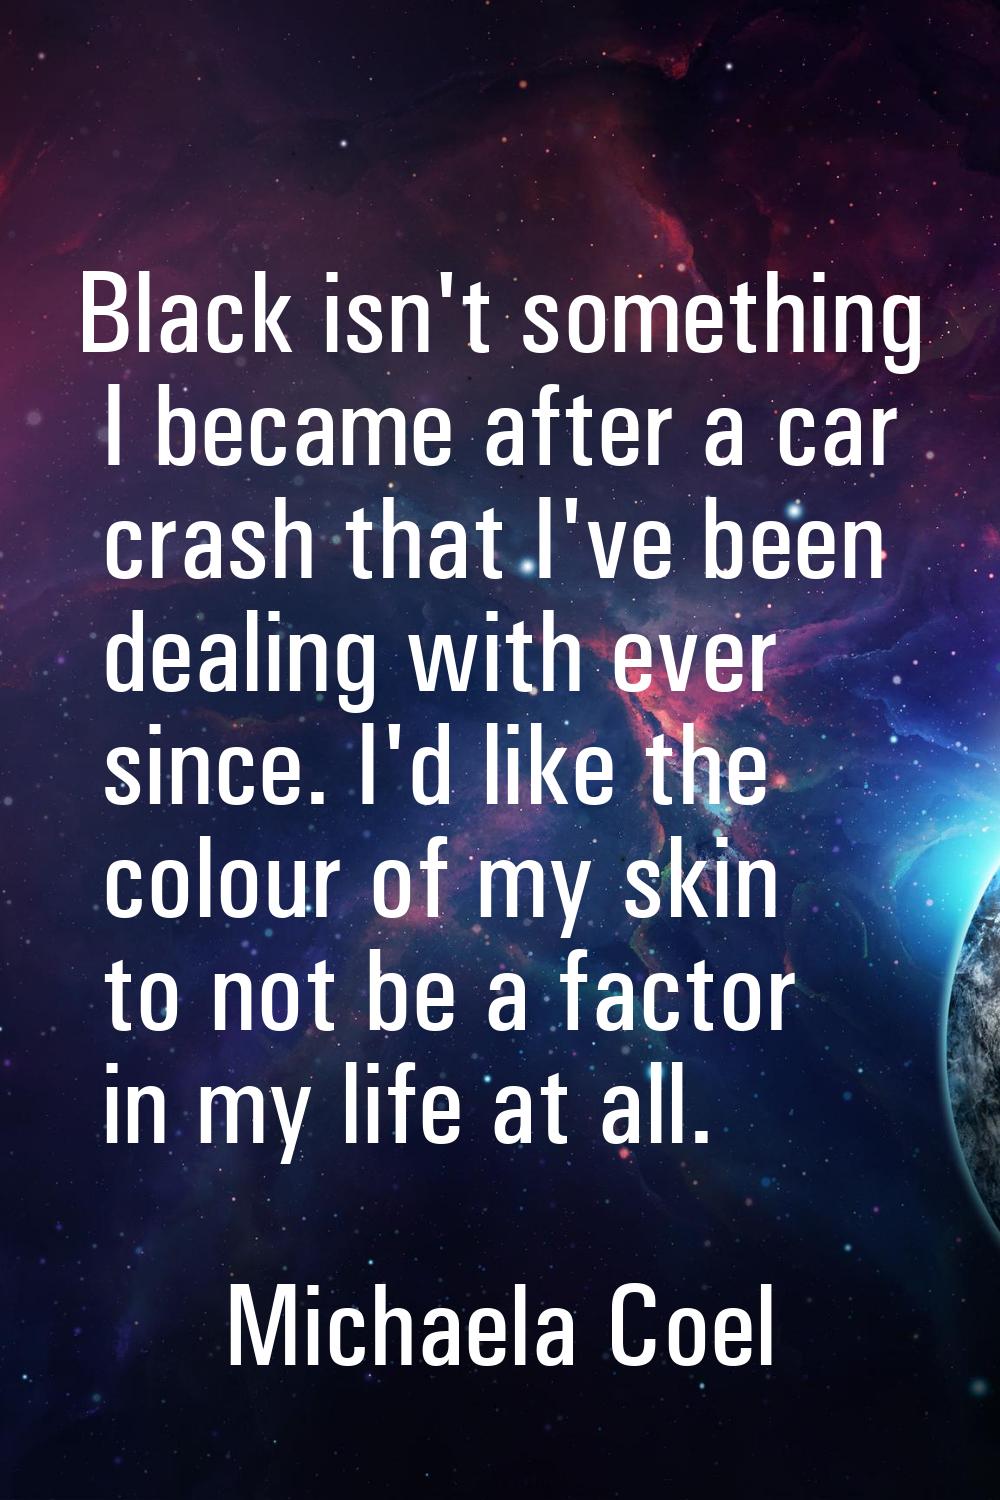 Black isn't something I became after a car crash that I've been dealing with ever since. I'd like t